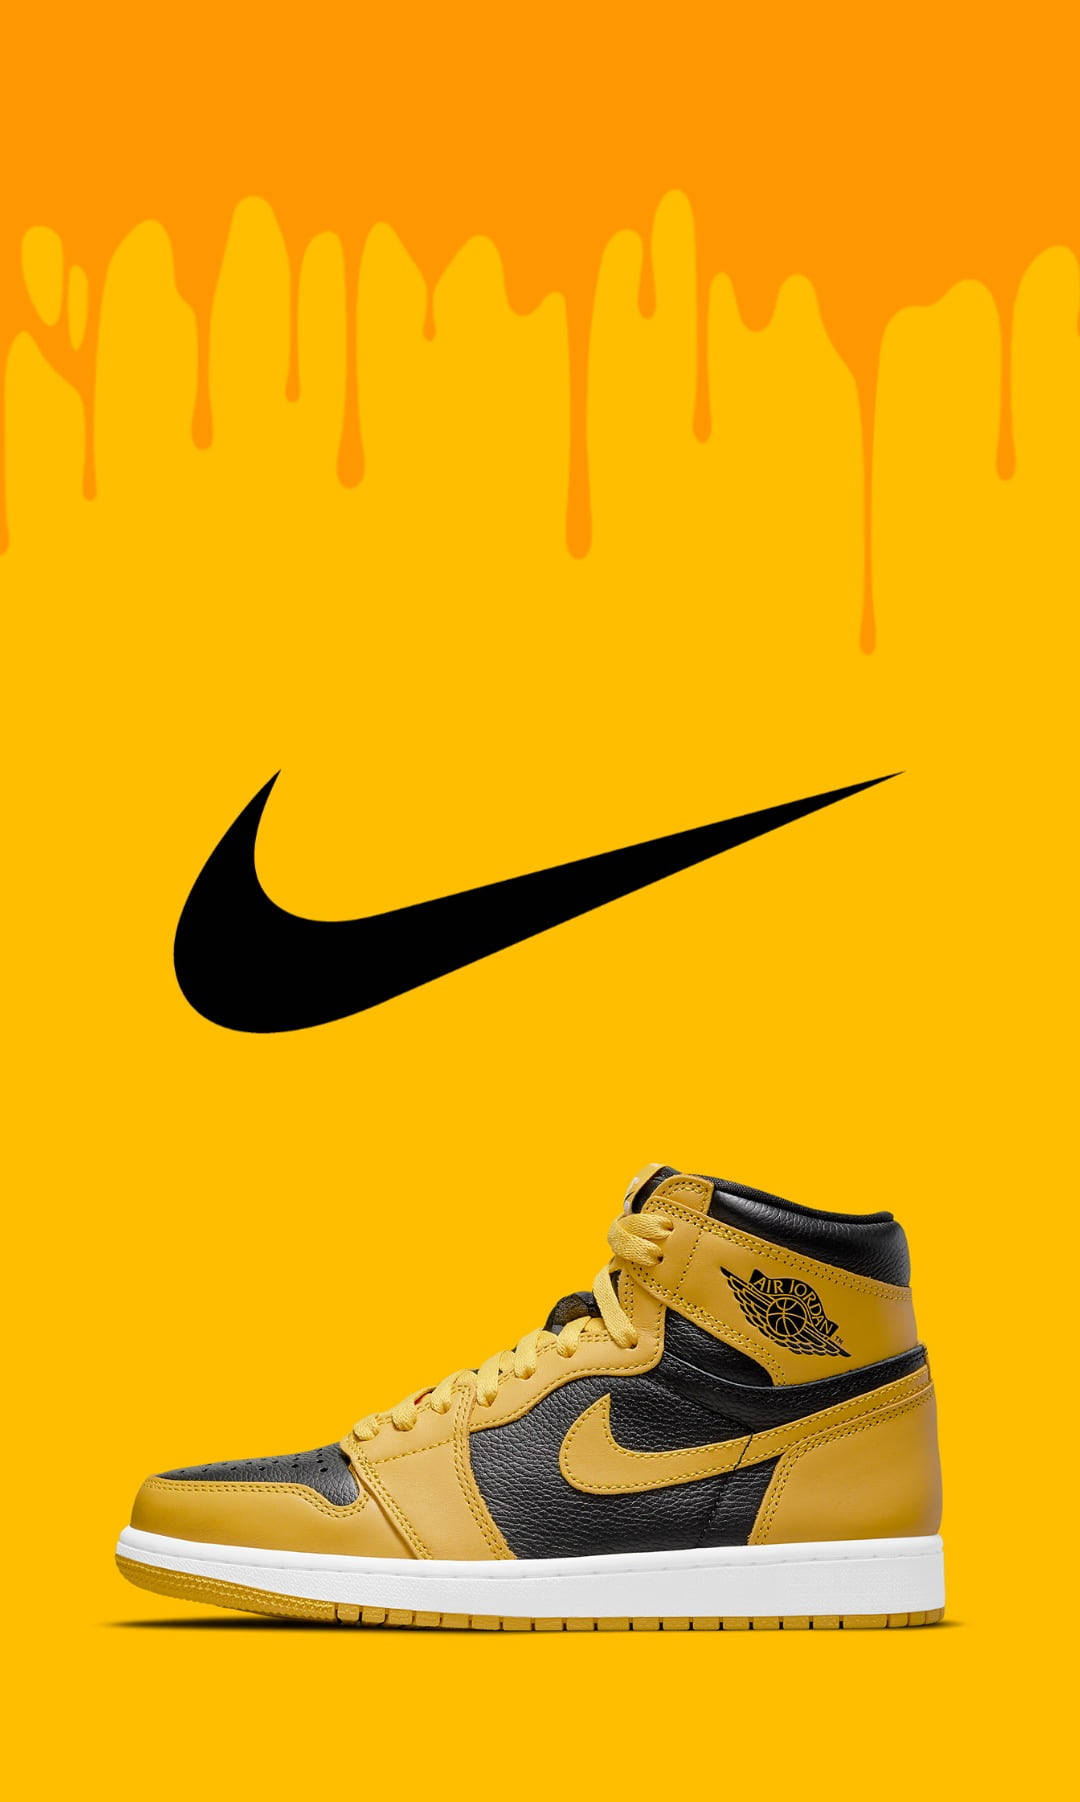 Classic Style Takes Center Stage In This Nike Jordan 1 Image Background